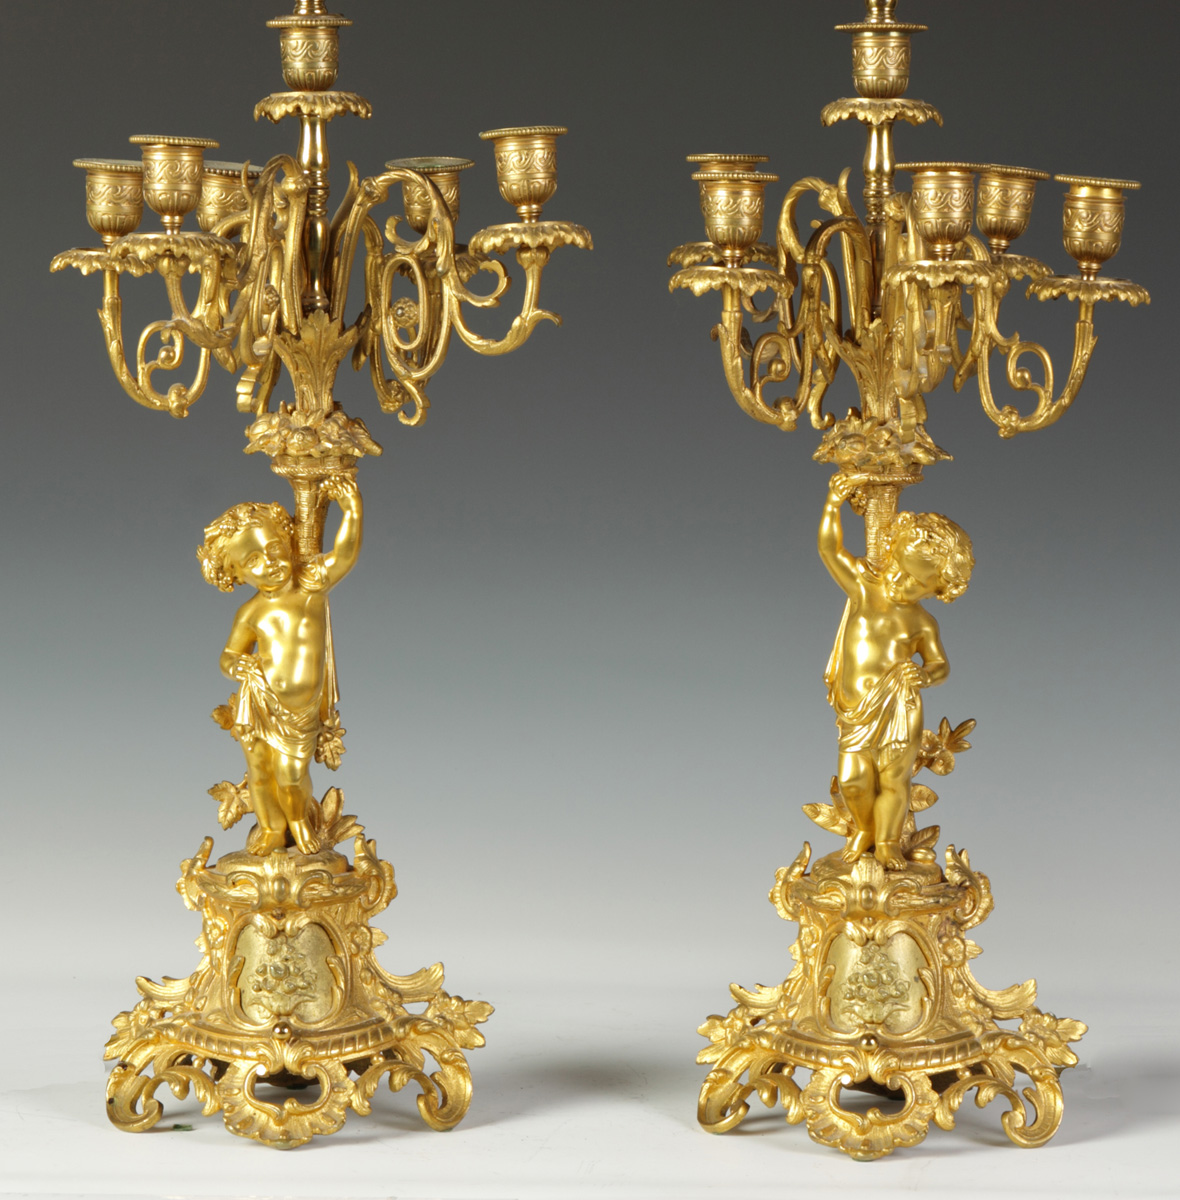 Pair of French Bronze 5-Arm Candelabras